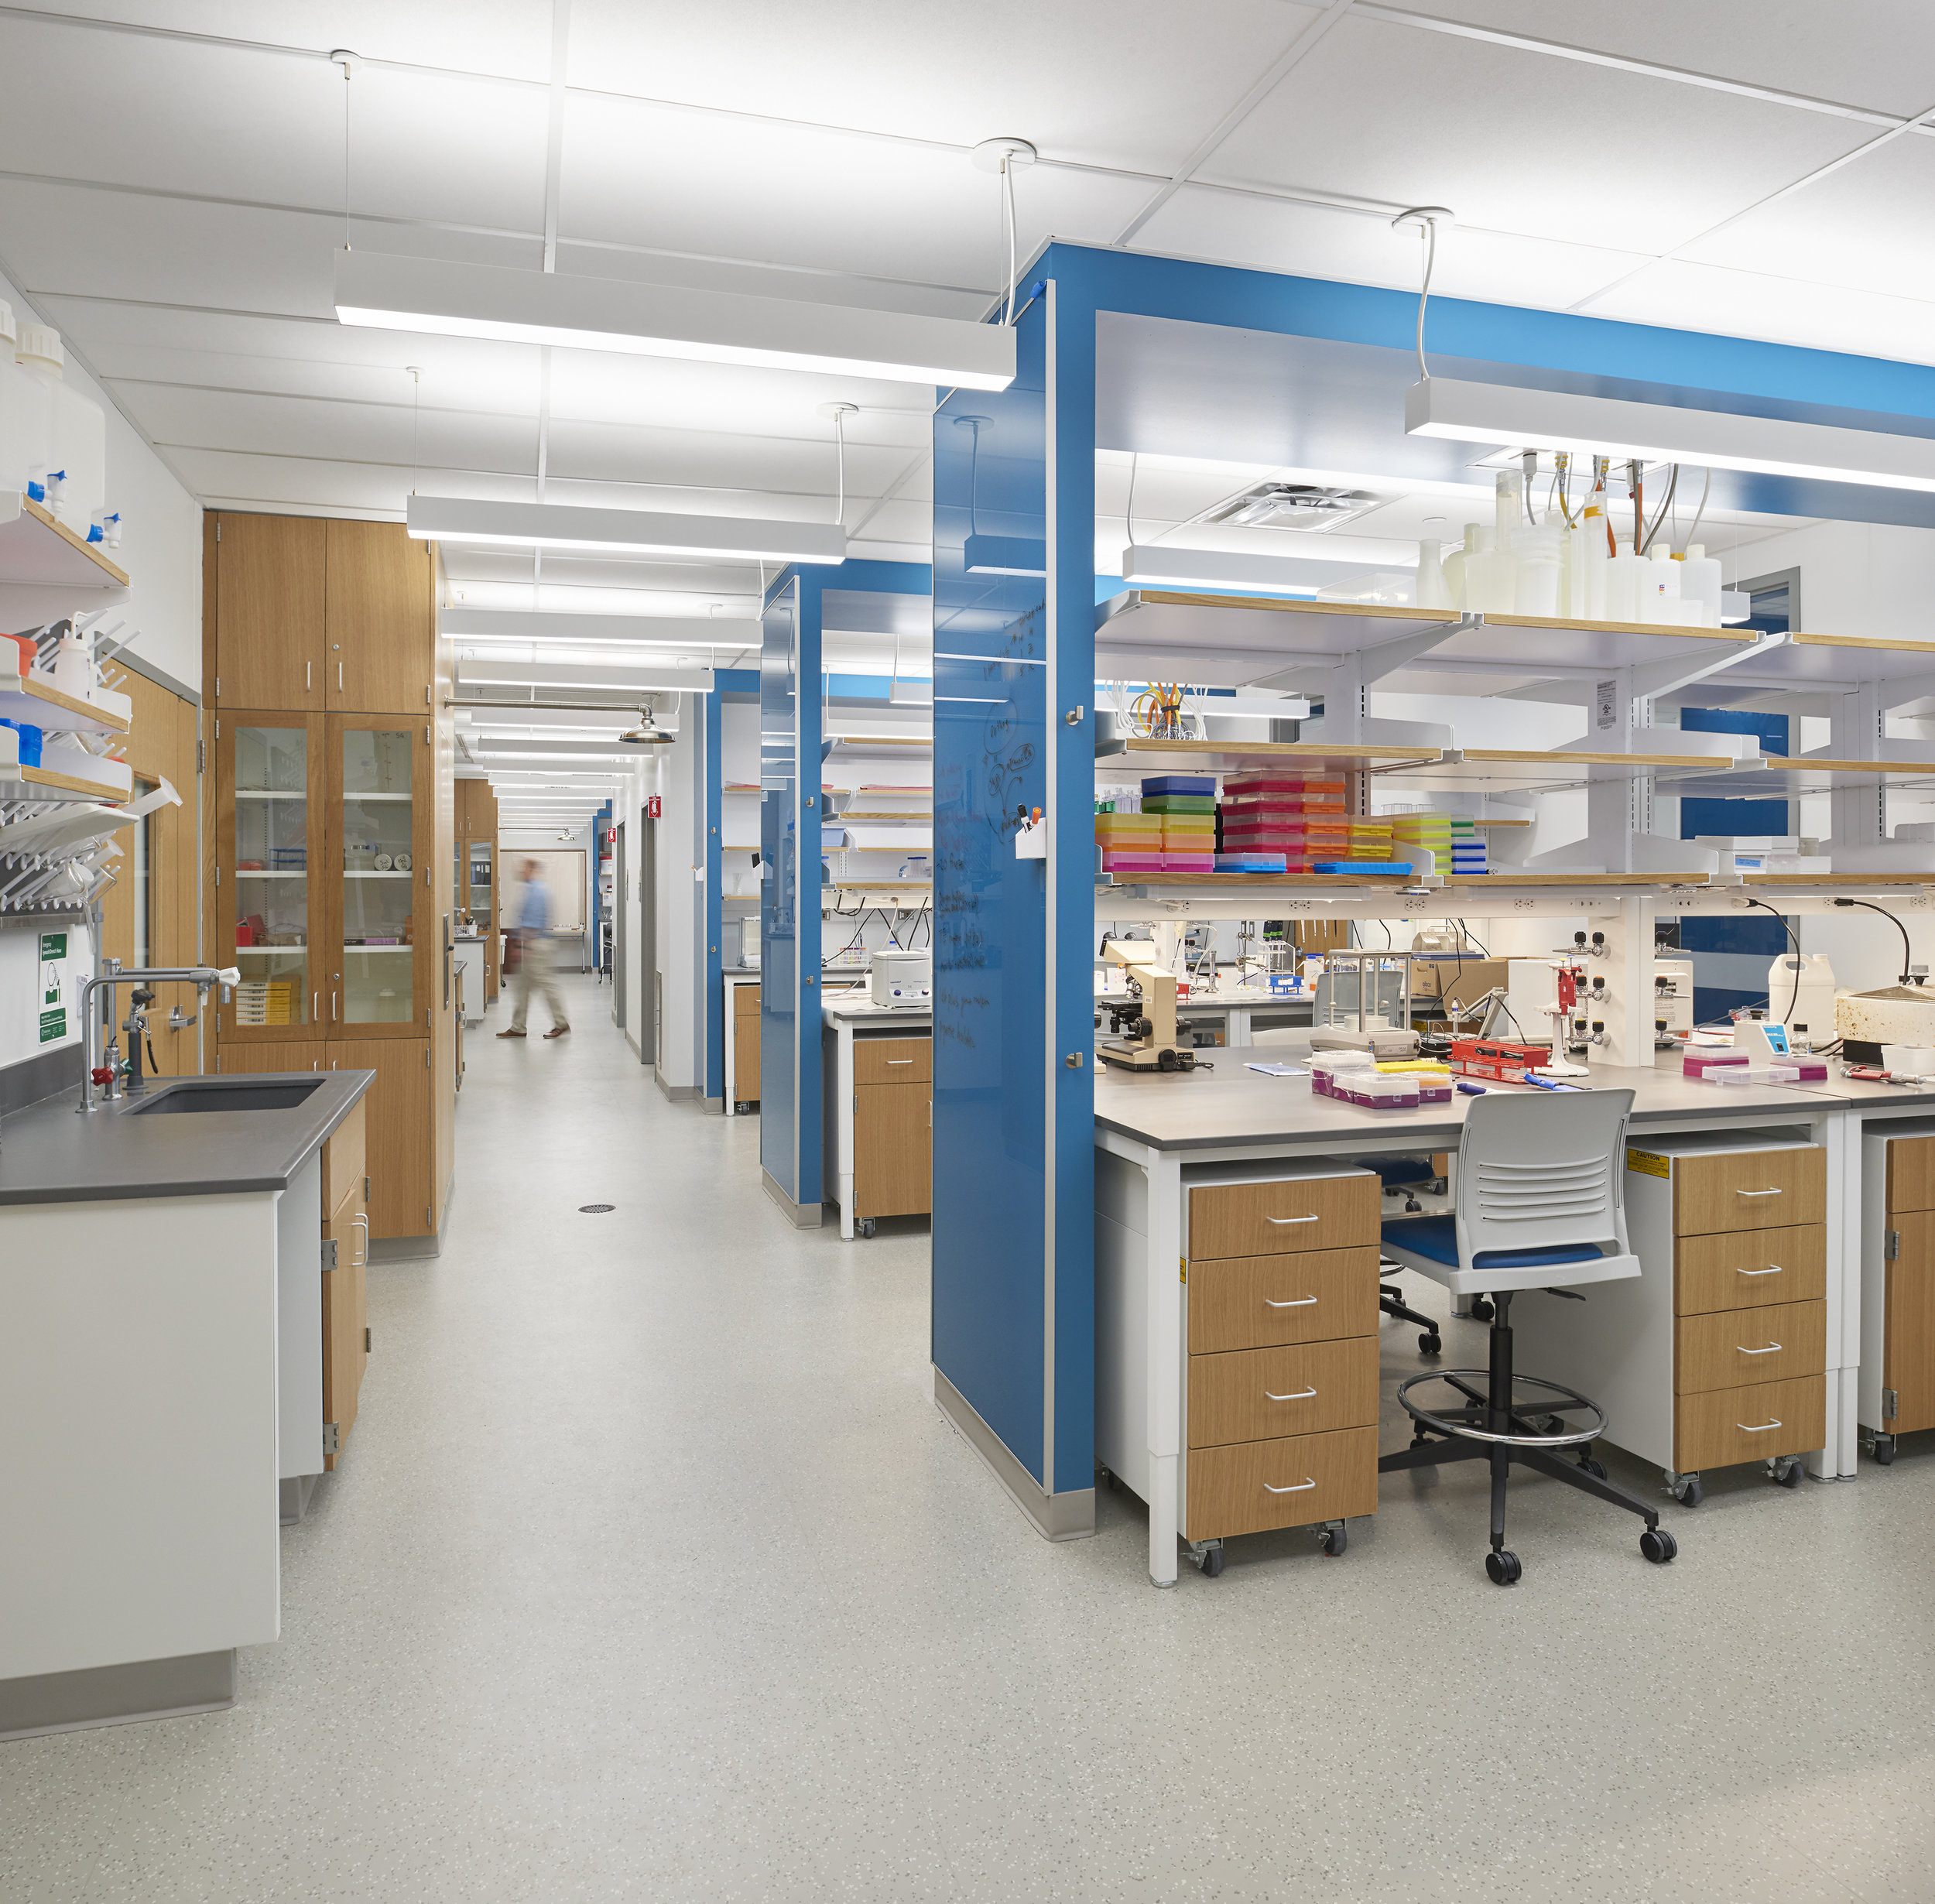 COOKE &amp; HOCHSTETTER HALL LAB RENOVATIONS&lt;strong&gt;SUCF / University at Buffalo&lt;/strong&gt;